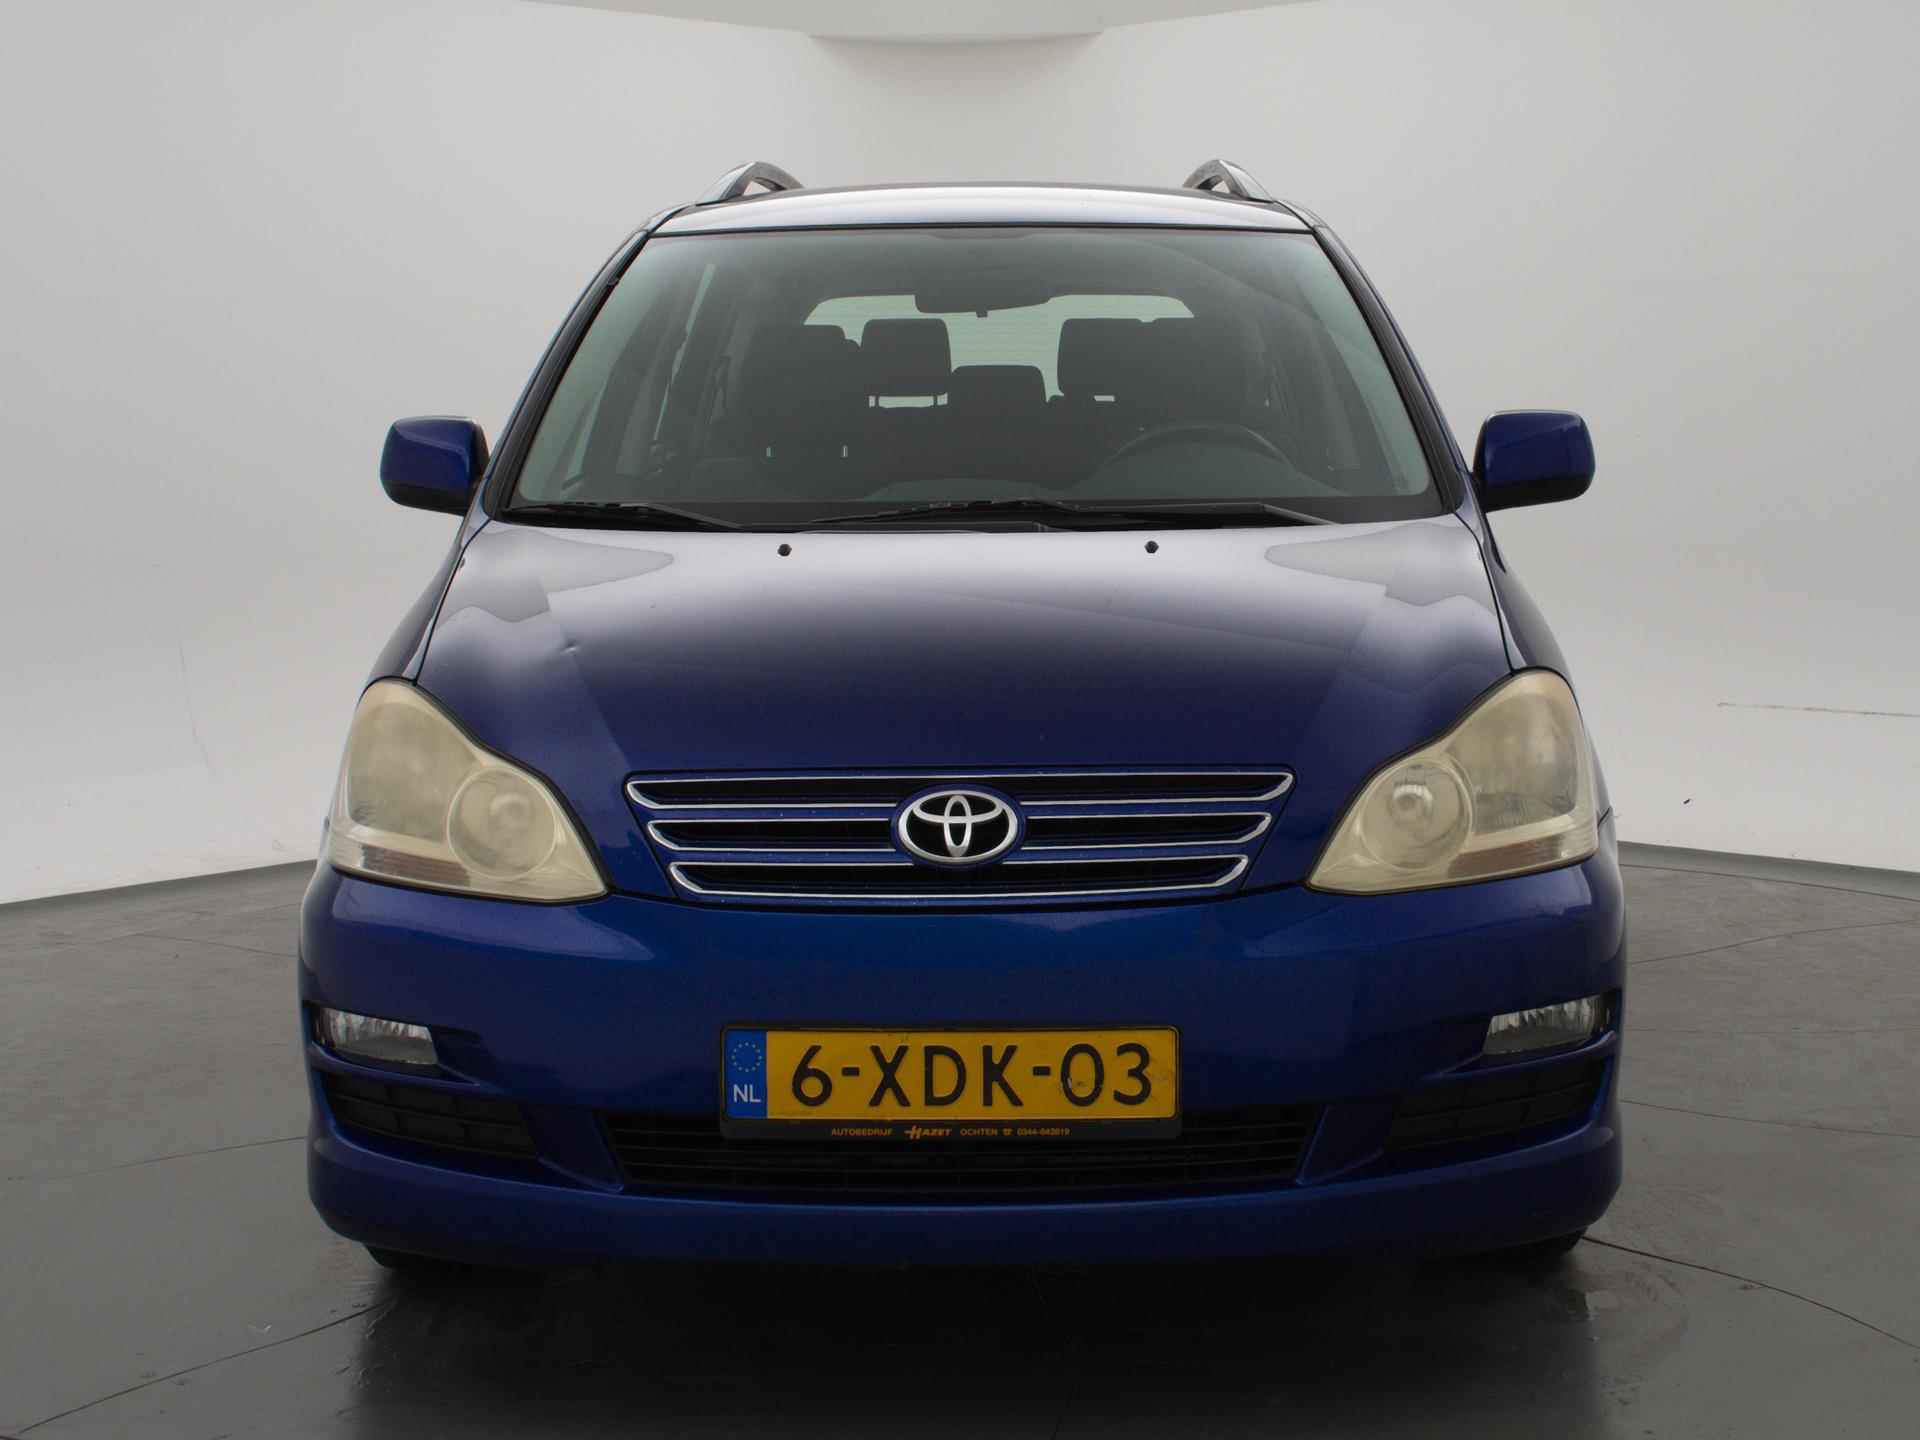 Toyota Avensis Verso 2.0i AUTOMAAT 7-PERSOONS + NAVIGATIE / CAMERA / CLIMATE CONTROL - 7/29